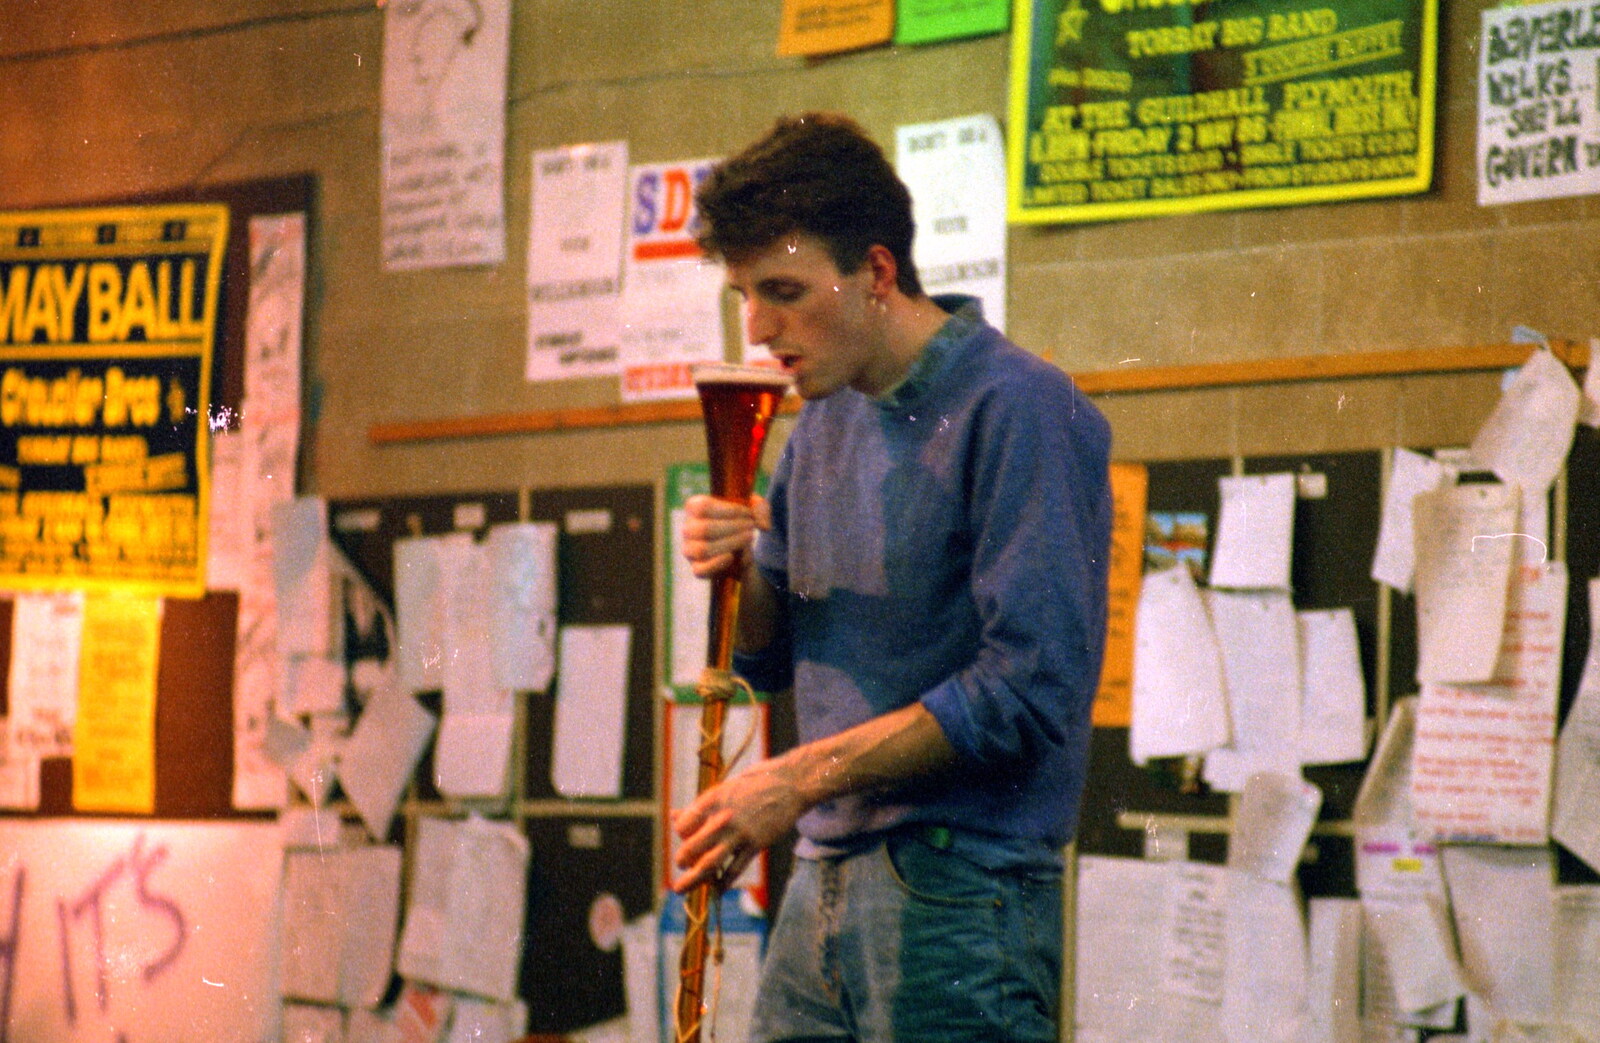 Grant readies the yard of ale from Uni: The End of Term and Whitsand Bay, Plymouth and New Milton - 21st March 1986